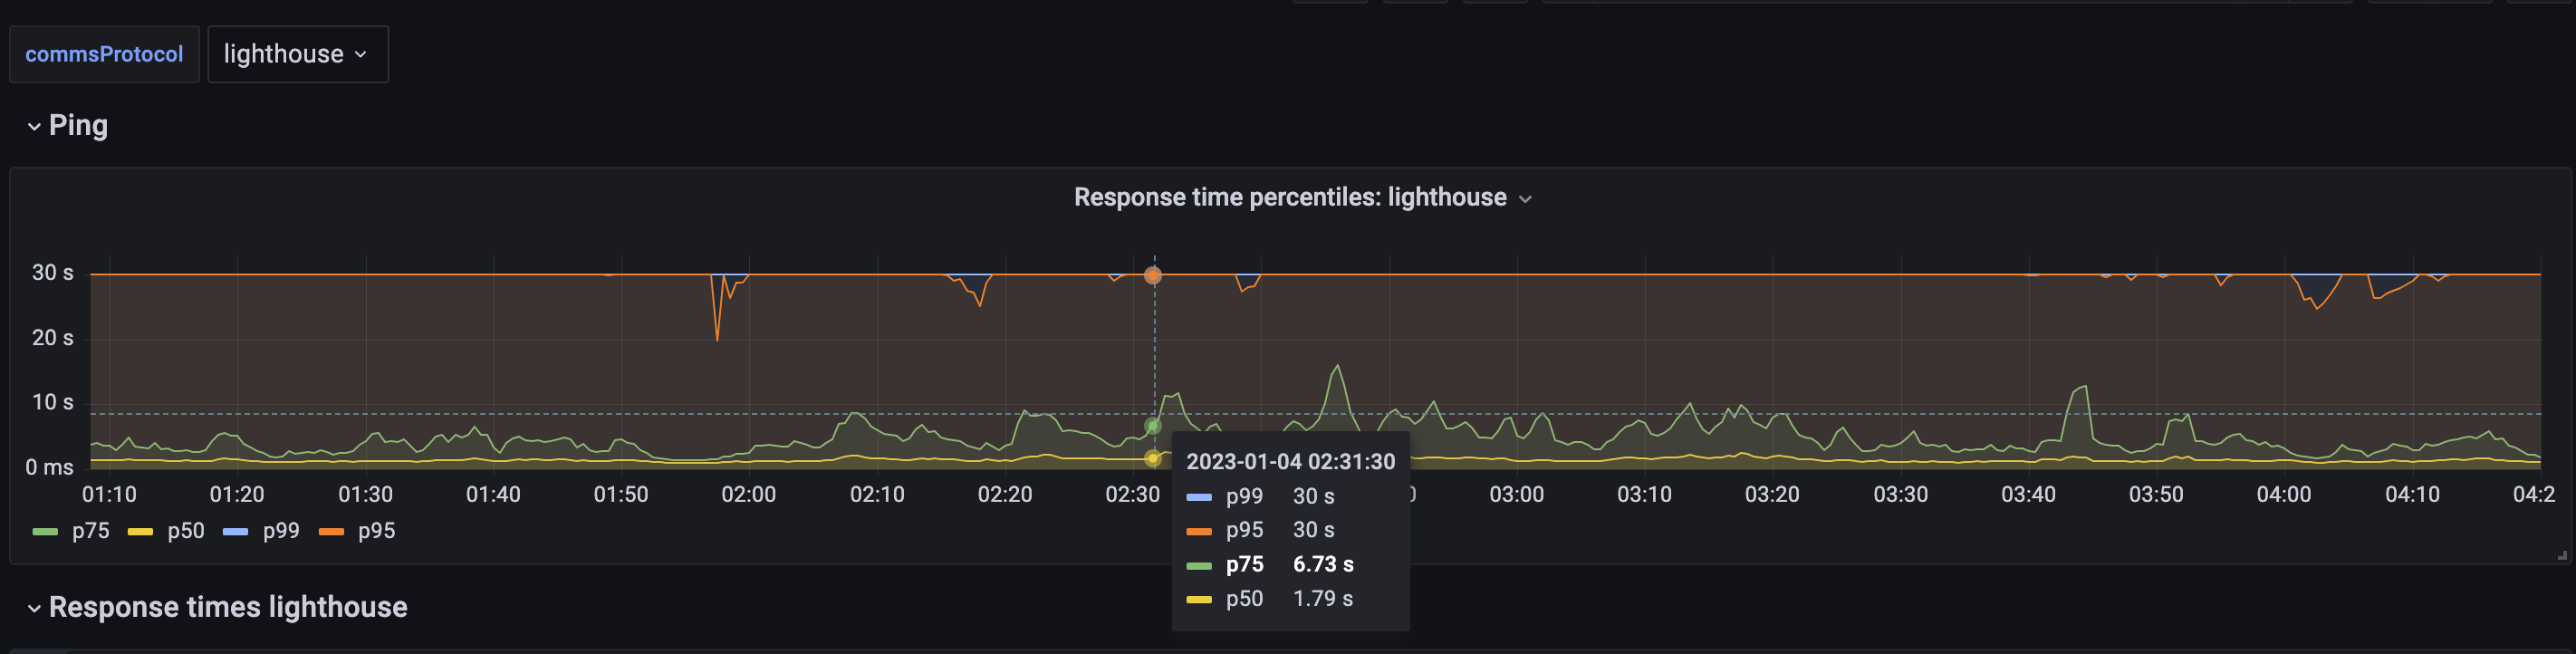 Internal Decentraland dashboard showing p75 response time was 6.73 seconds before switching to LiveKit